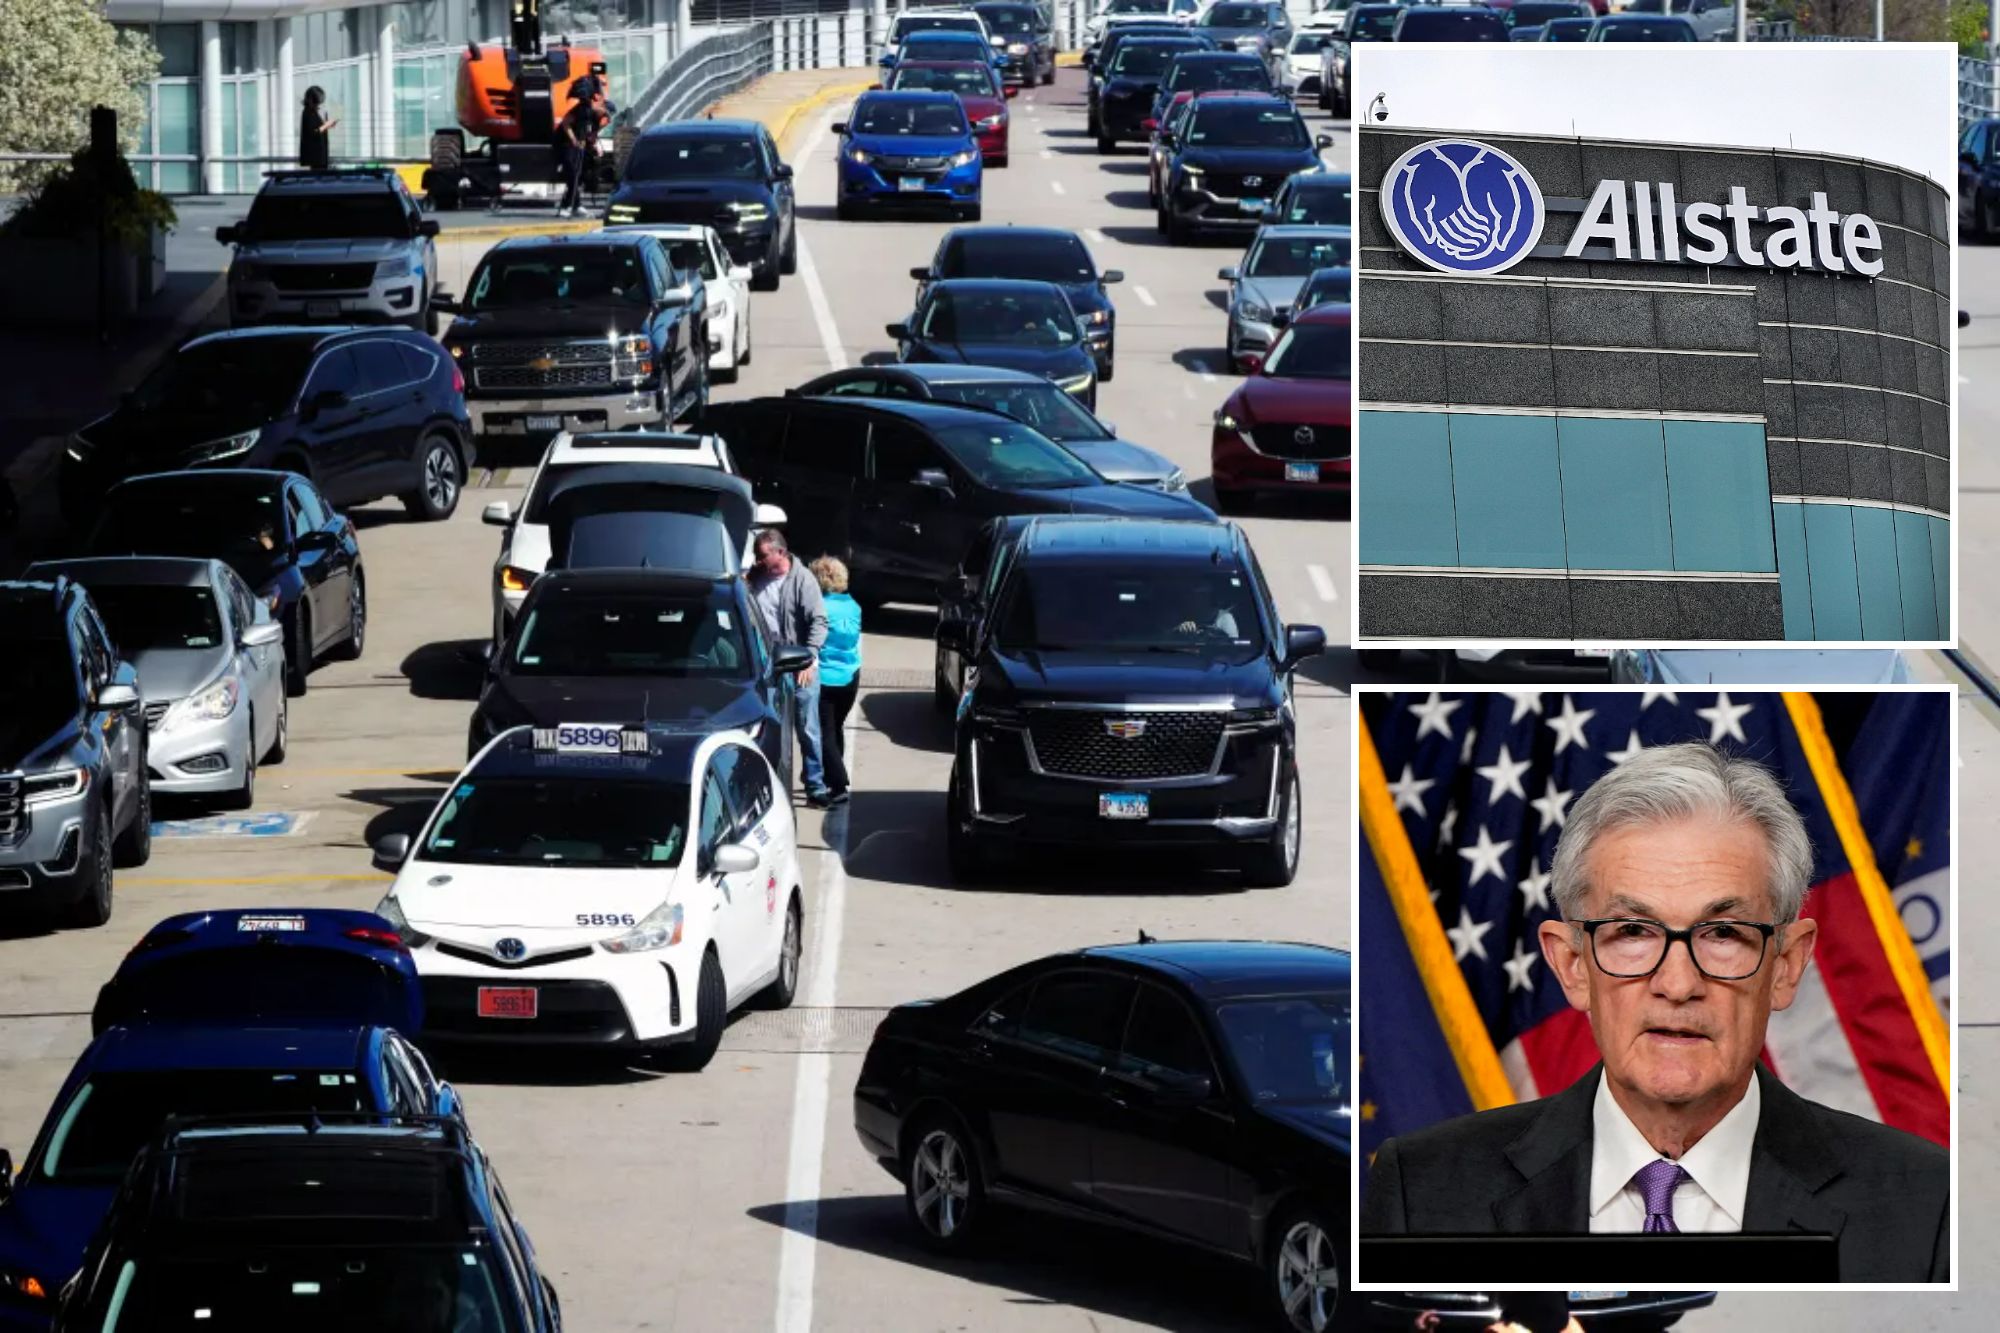 Traffic in Chicago, Allstate sign and Fed Chair Jerome Powell